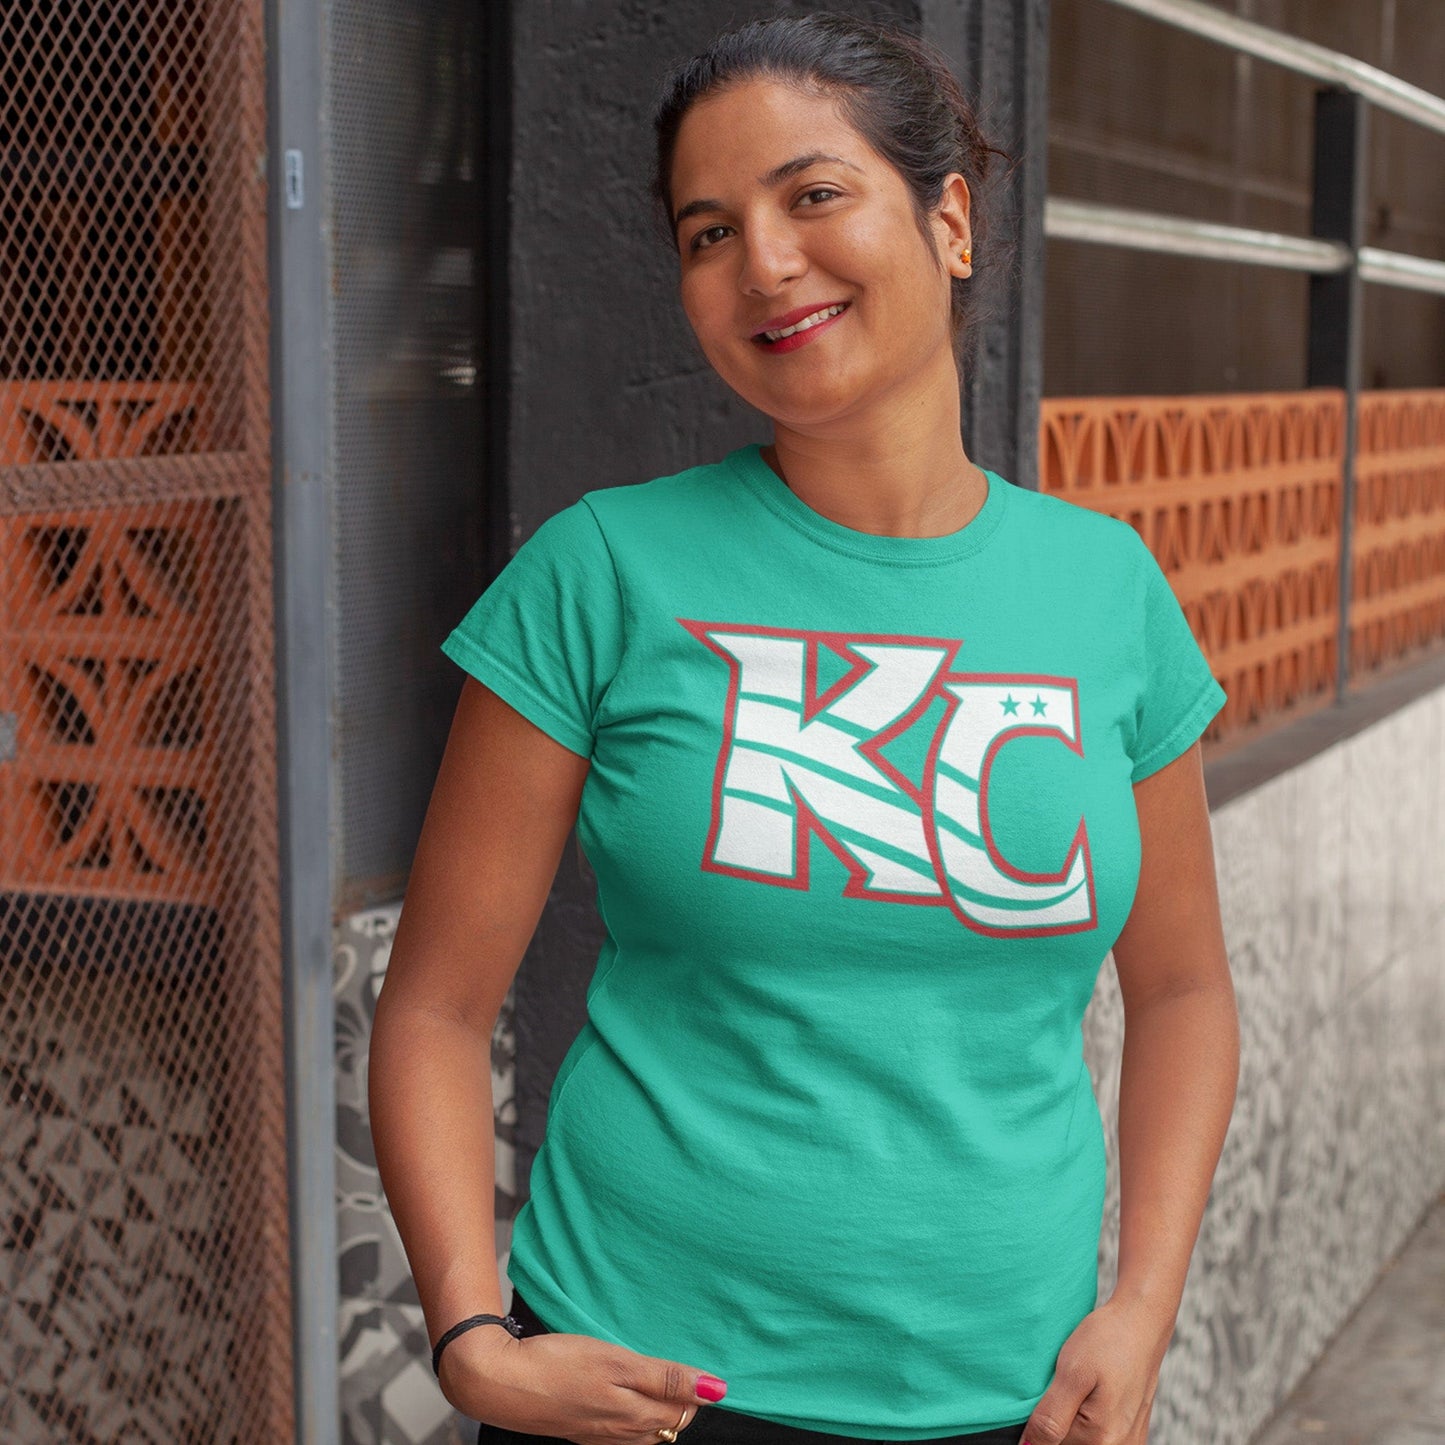 KC Swag Kansas City Current CURRENT KC on teal unisex t-shirt worn by female model standing outside downtown building